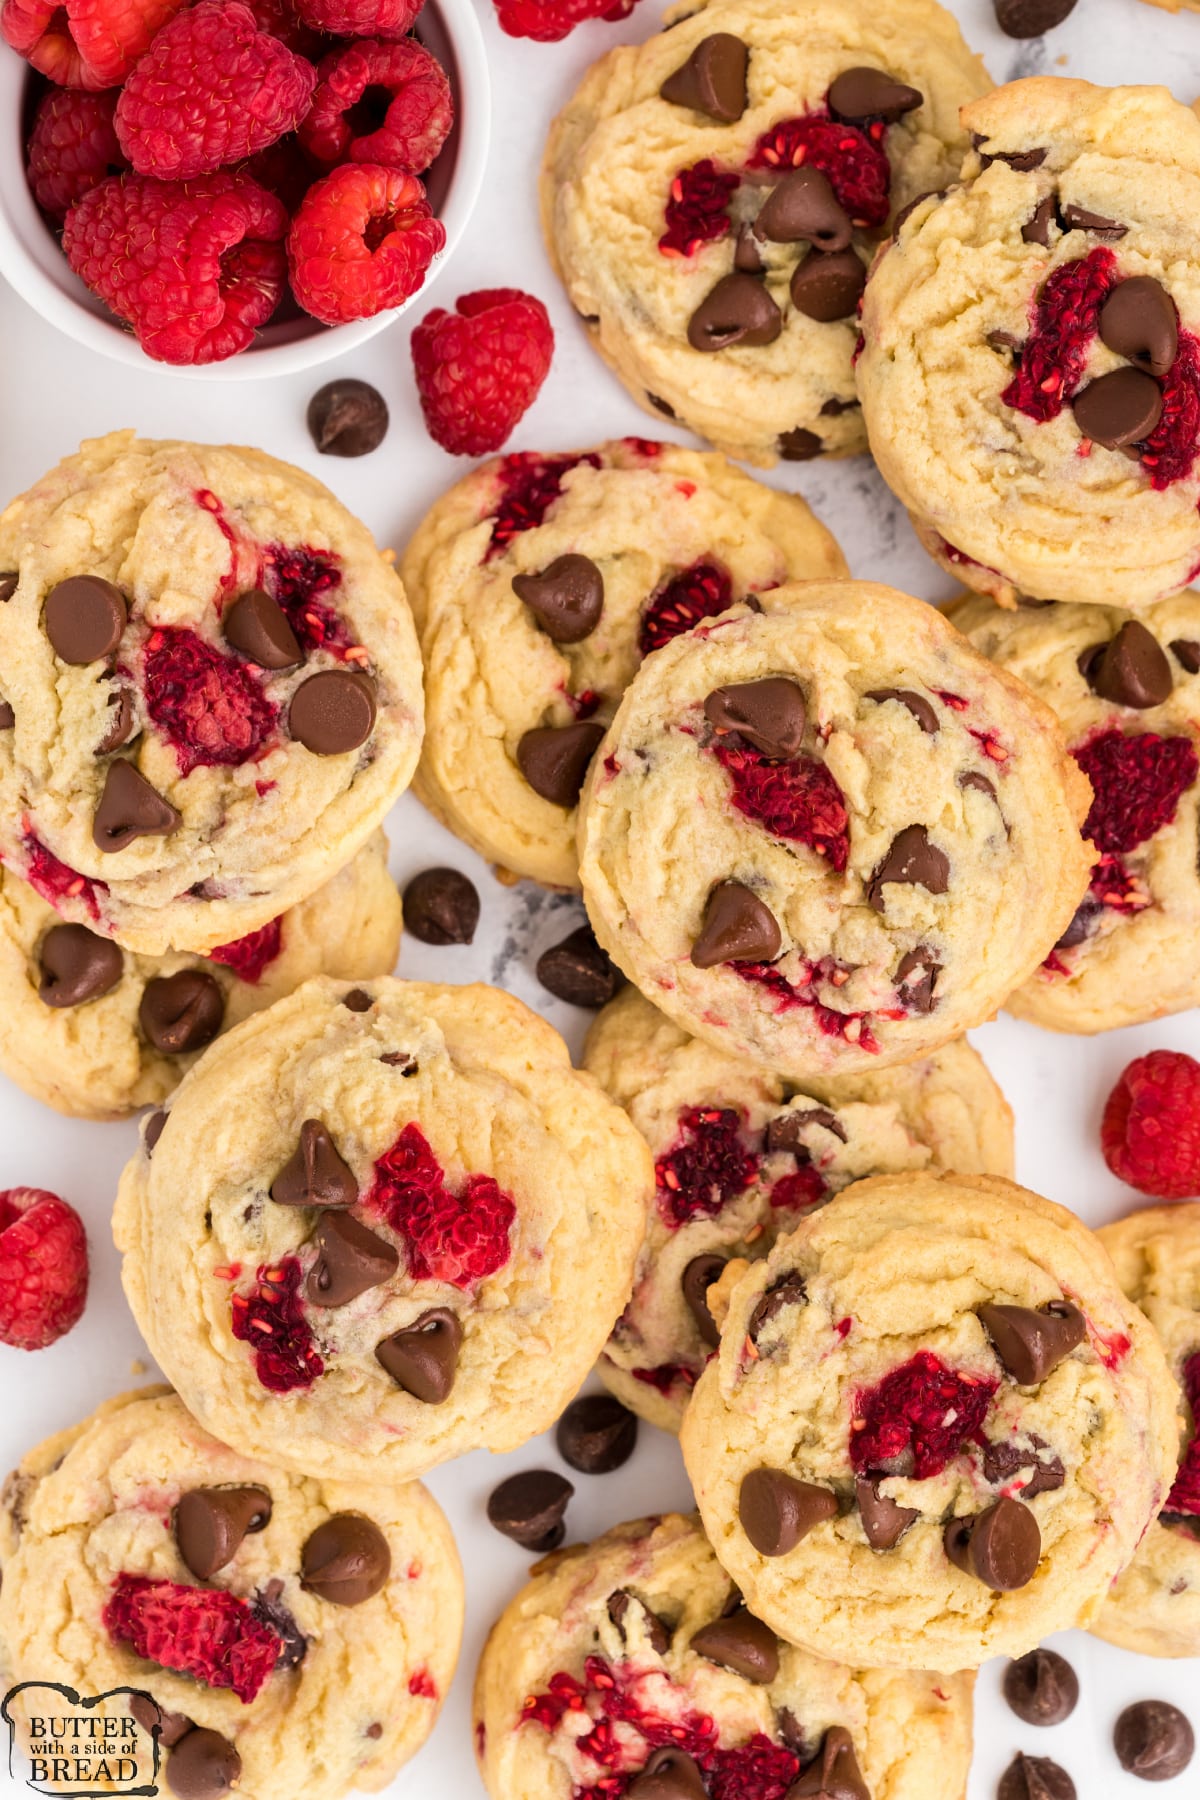 Raspberry Chocolate Chip Cookies made with fresh raspberries and chocolate chips. Adding fresh raspberries to a classic chocolate chip cookie recipe makes a delicious difference!